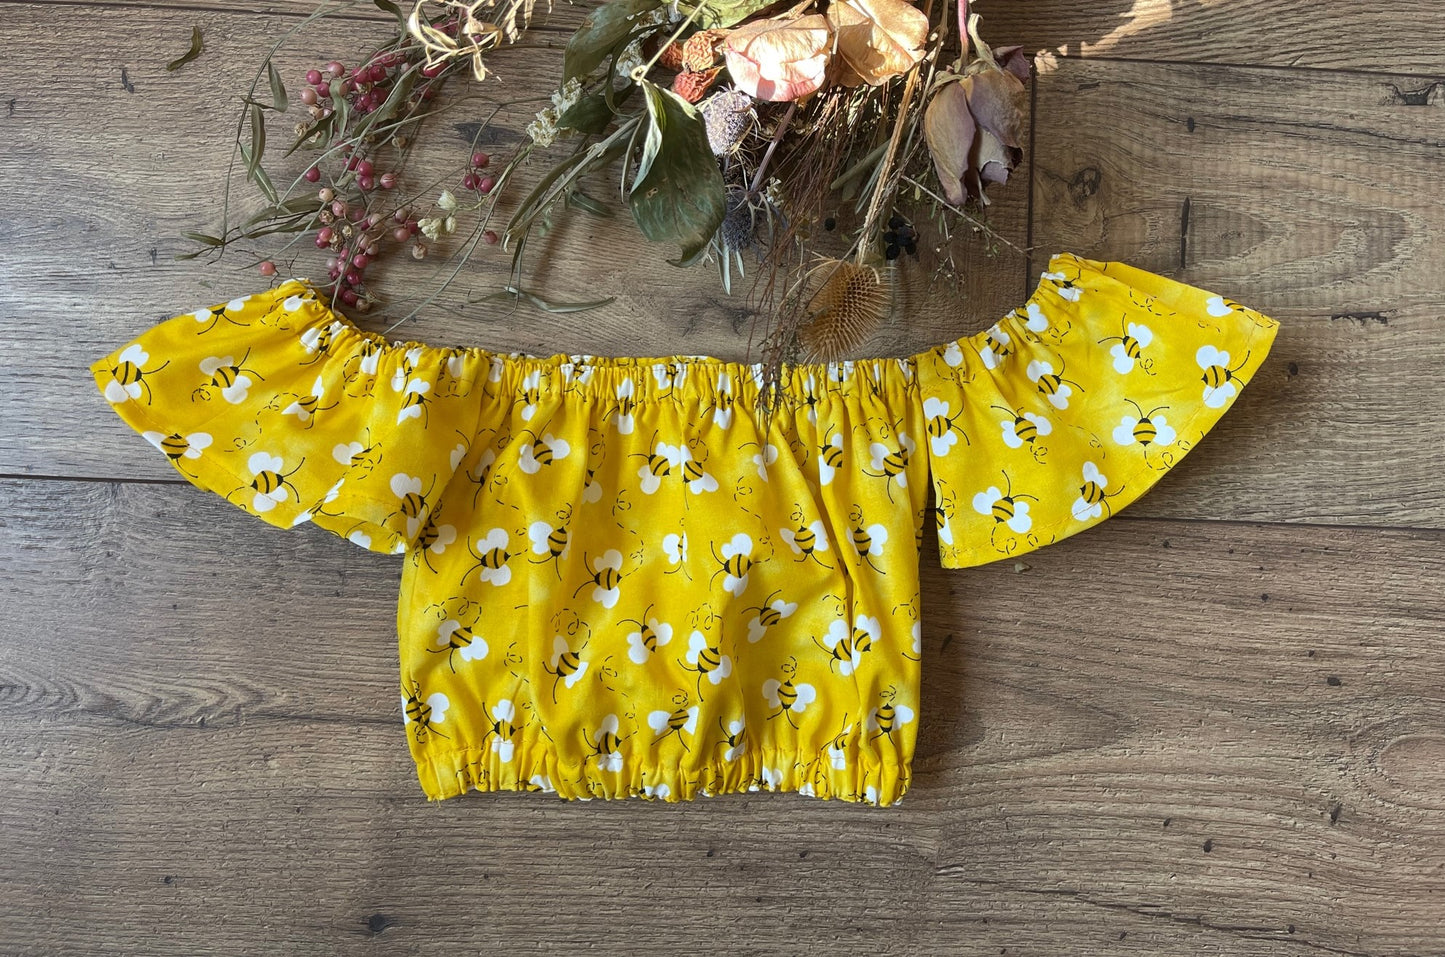 Infant Toddler Girls 2 Piece Yellow Bees Boho Style Outfit Bees Off the Shoulder Top Buffalo Check Bloomers Diaper Cover